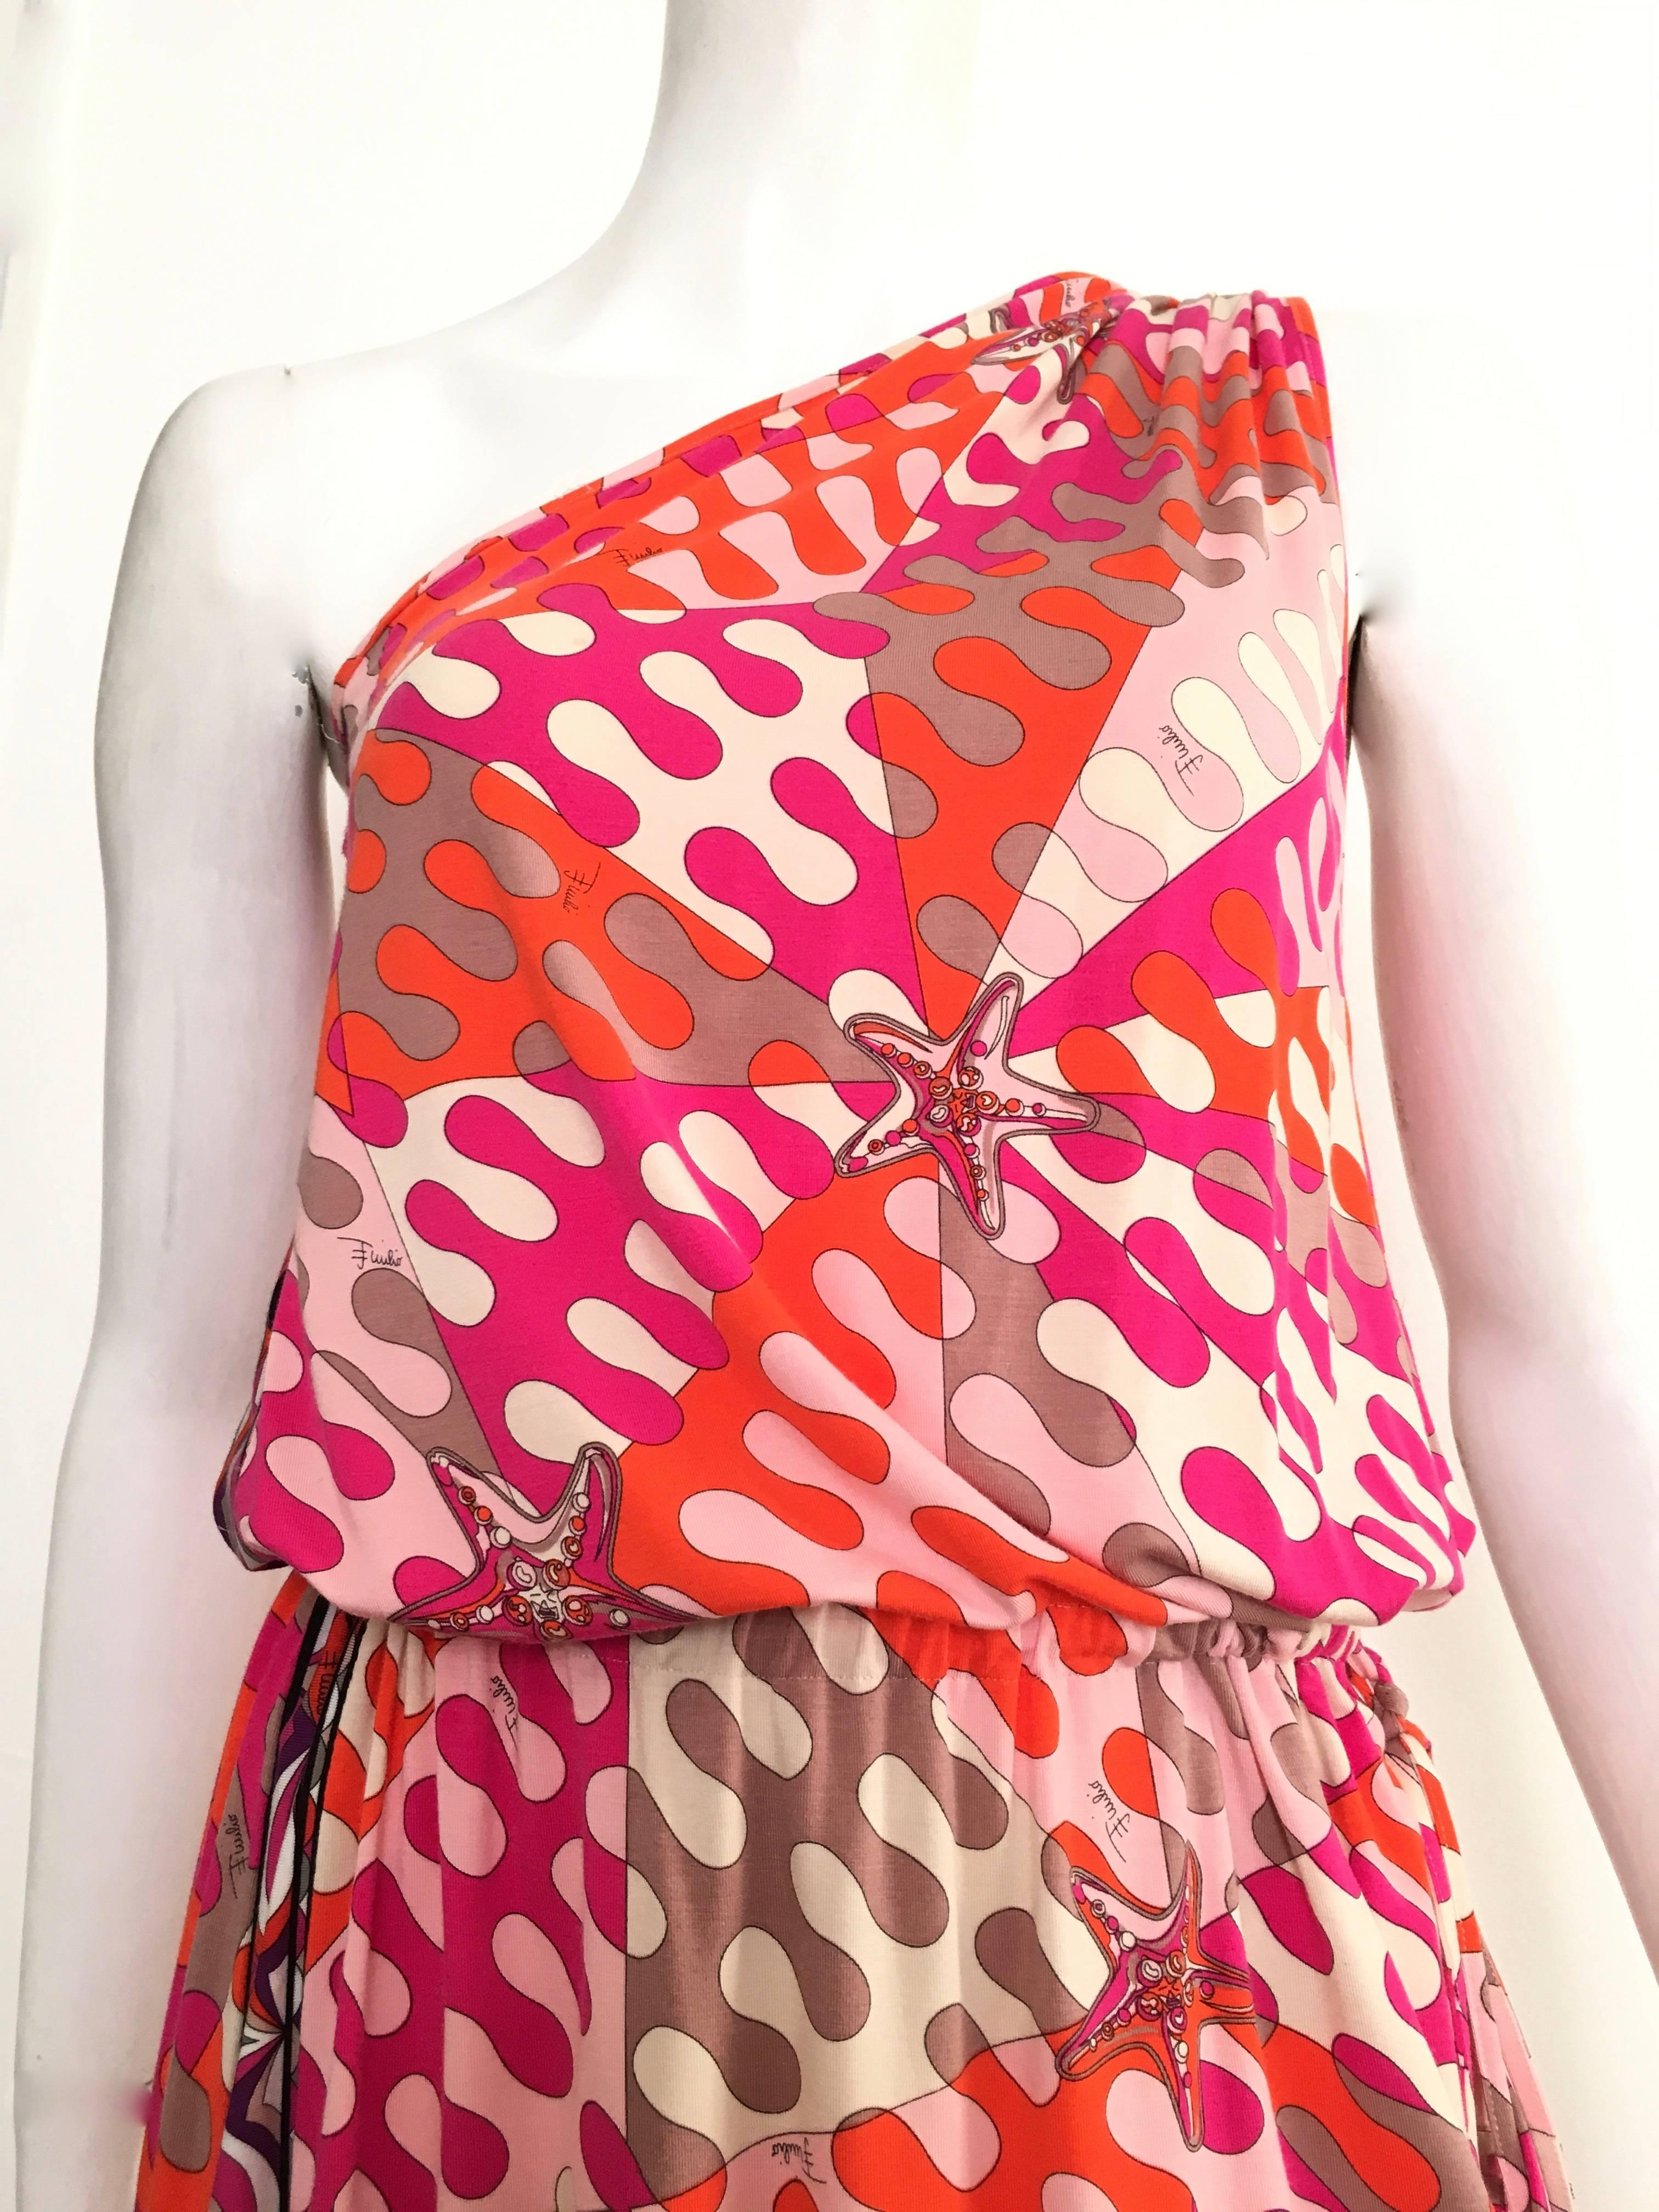 Emilio Pucci whimsical starfish pattern off the shoulder knit dress is a size 6.  Ladies please grab your tape measure so you can properly measure your bust, waist & hips to make certain this gorgeous playful dress will fit you to perfection.